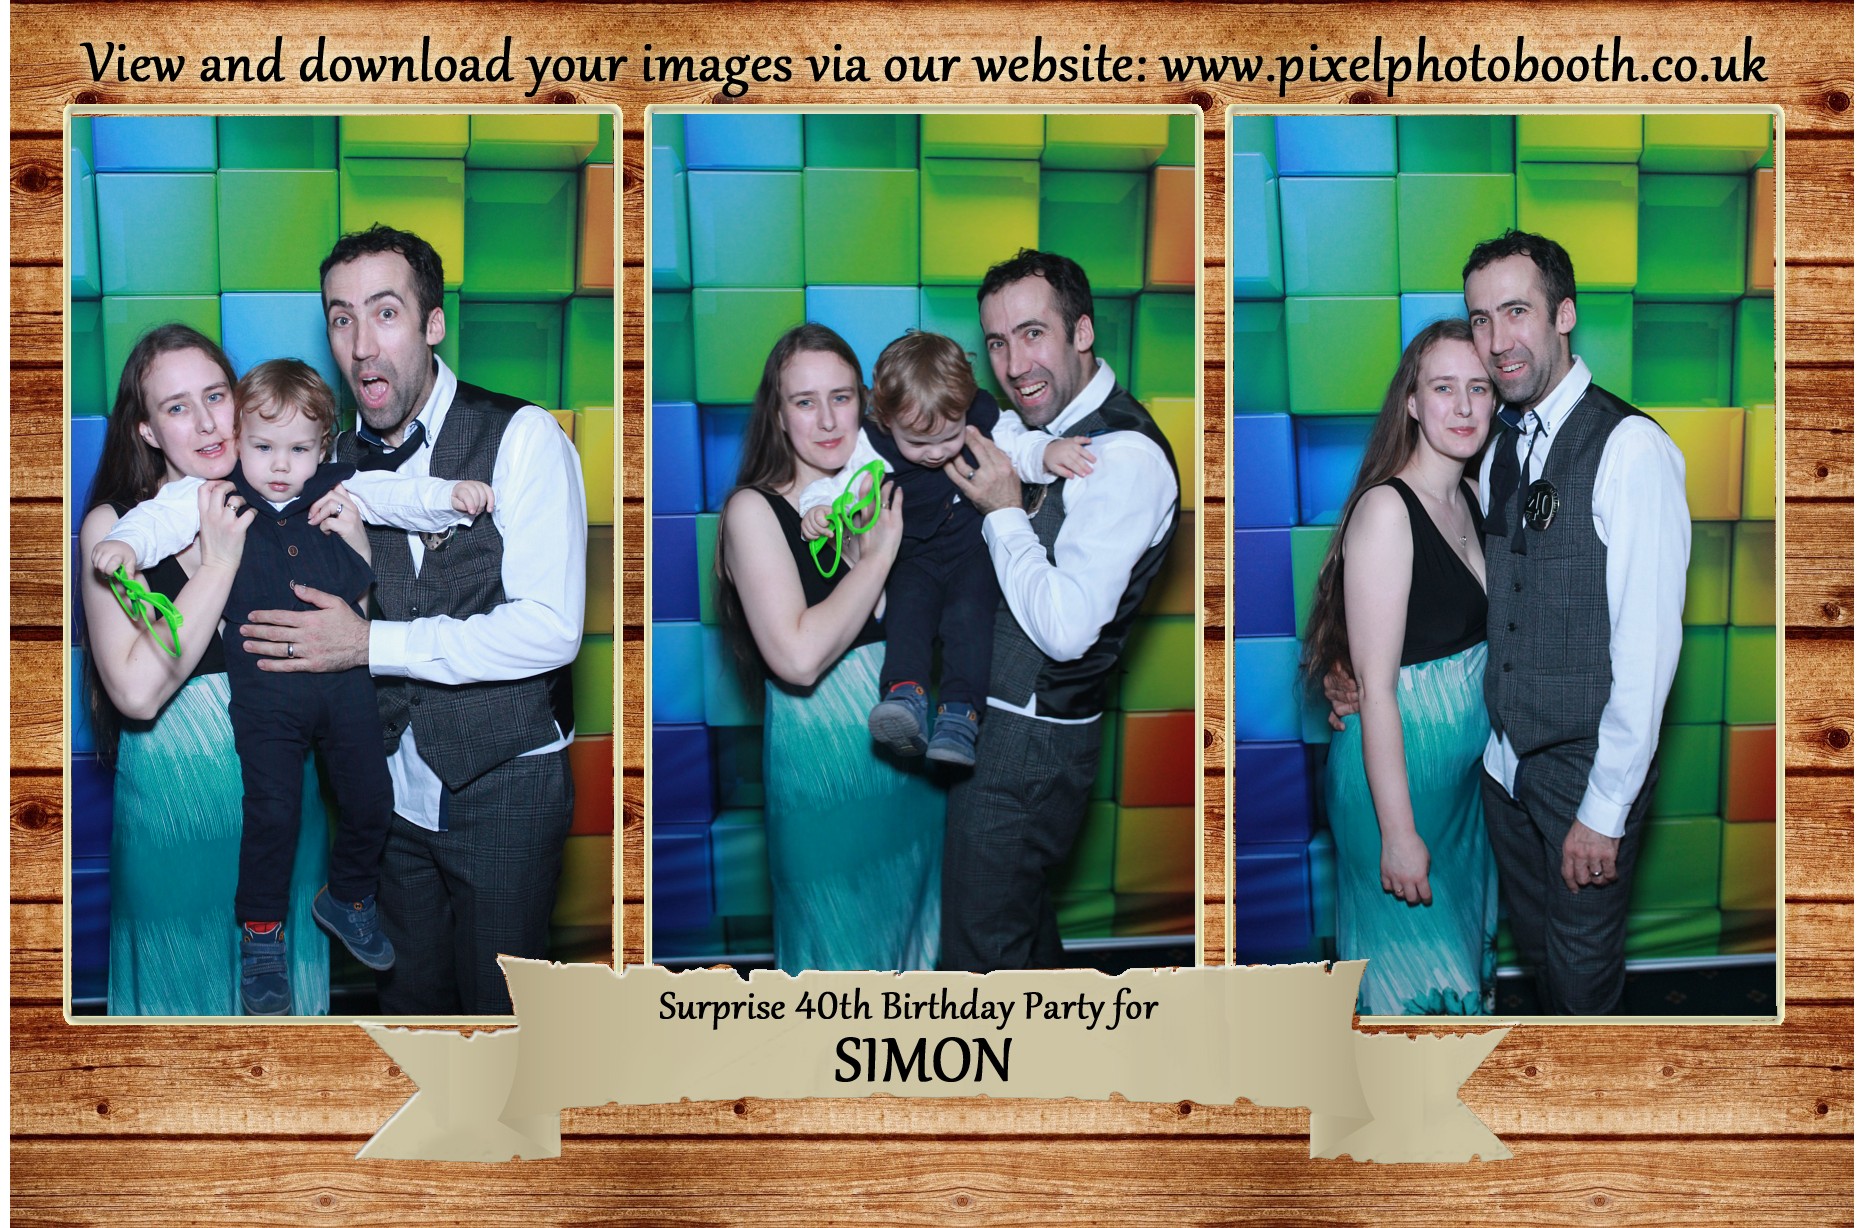 23rd March 2019: Simon's 40th Birthday Party